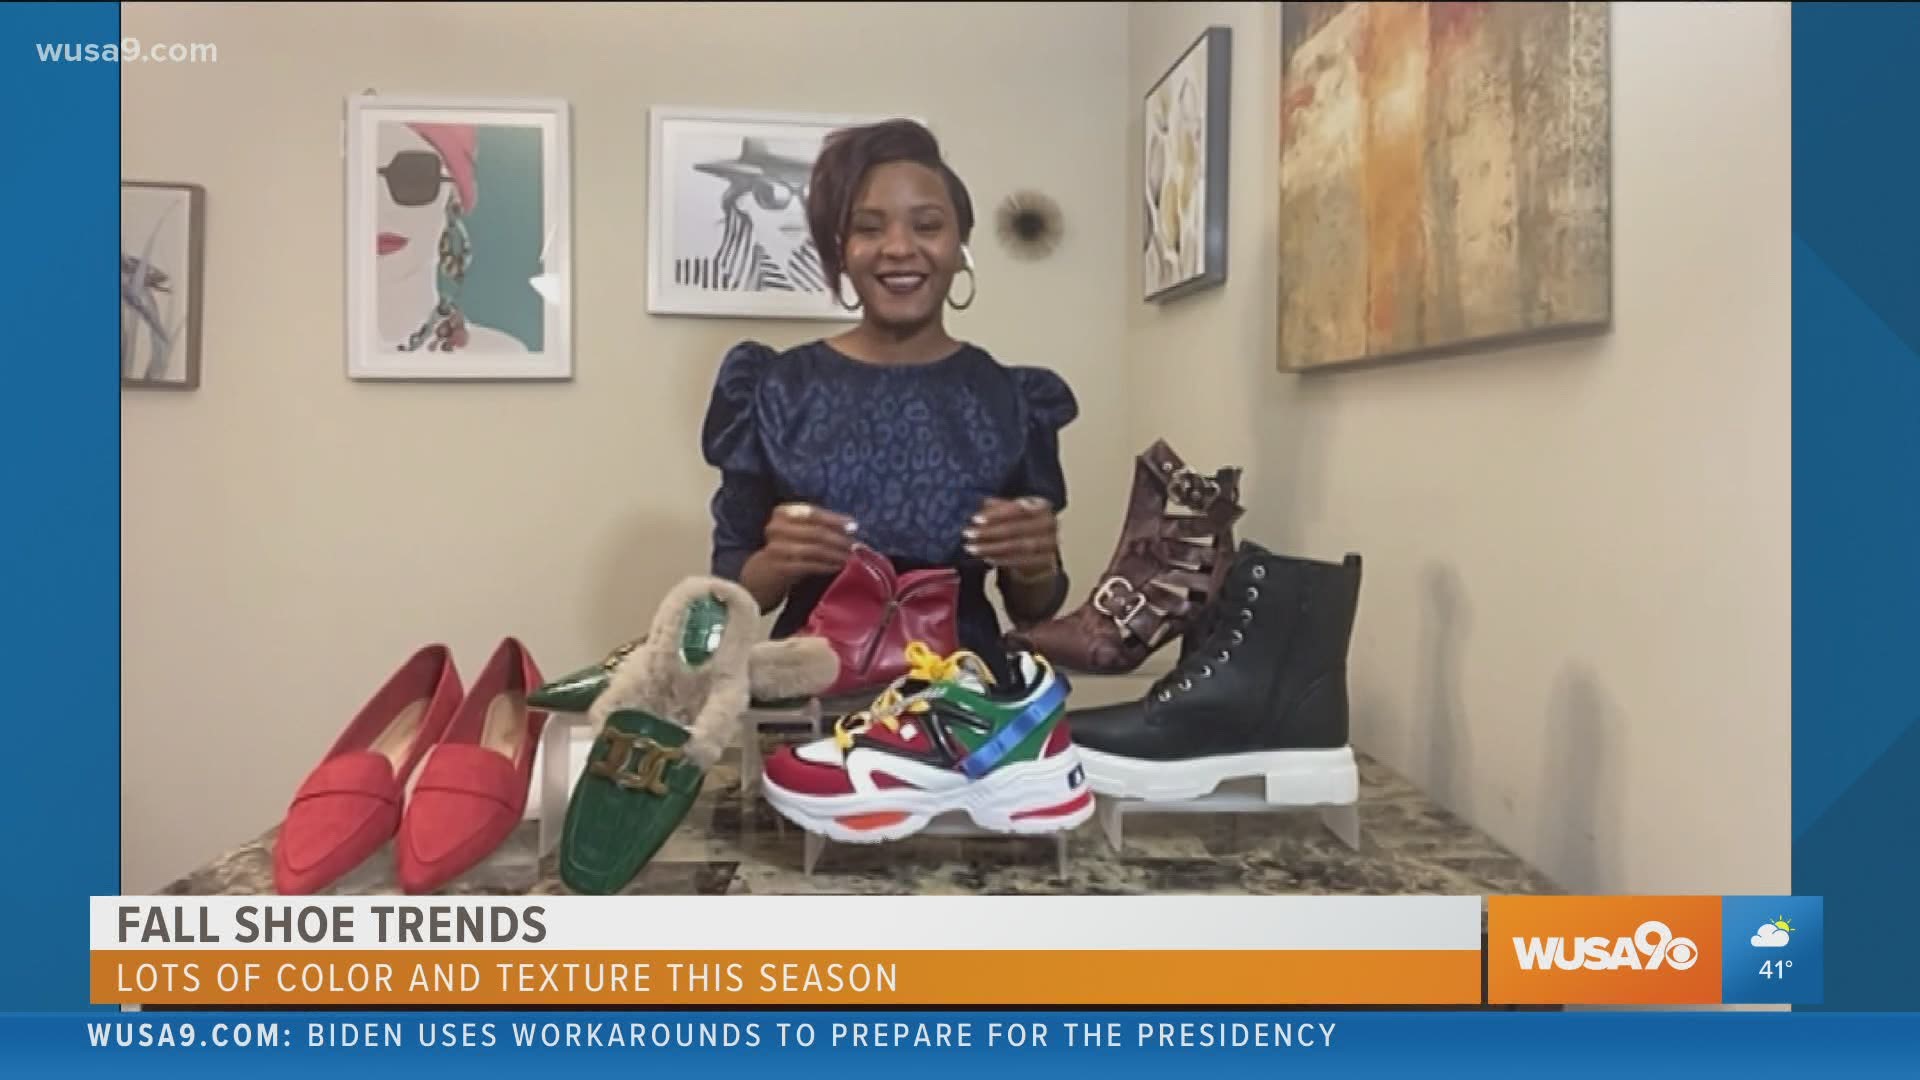 Fashion stylist Margo Burr shares the fall shoe trends.